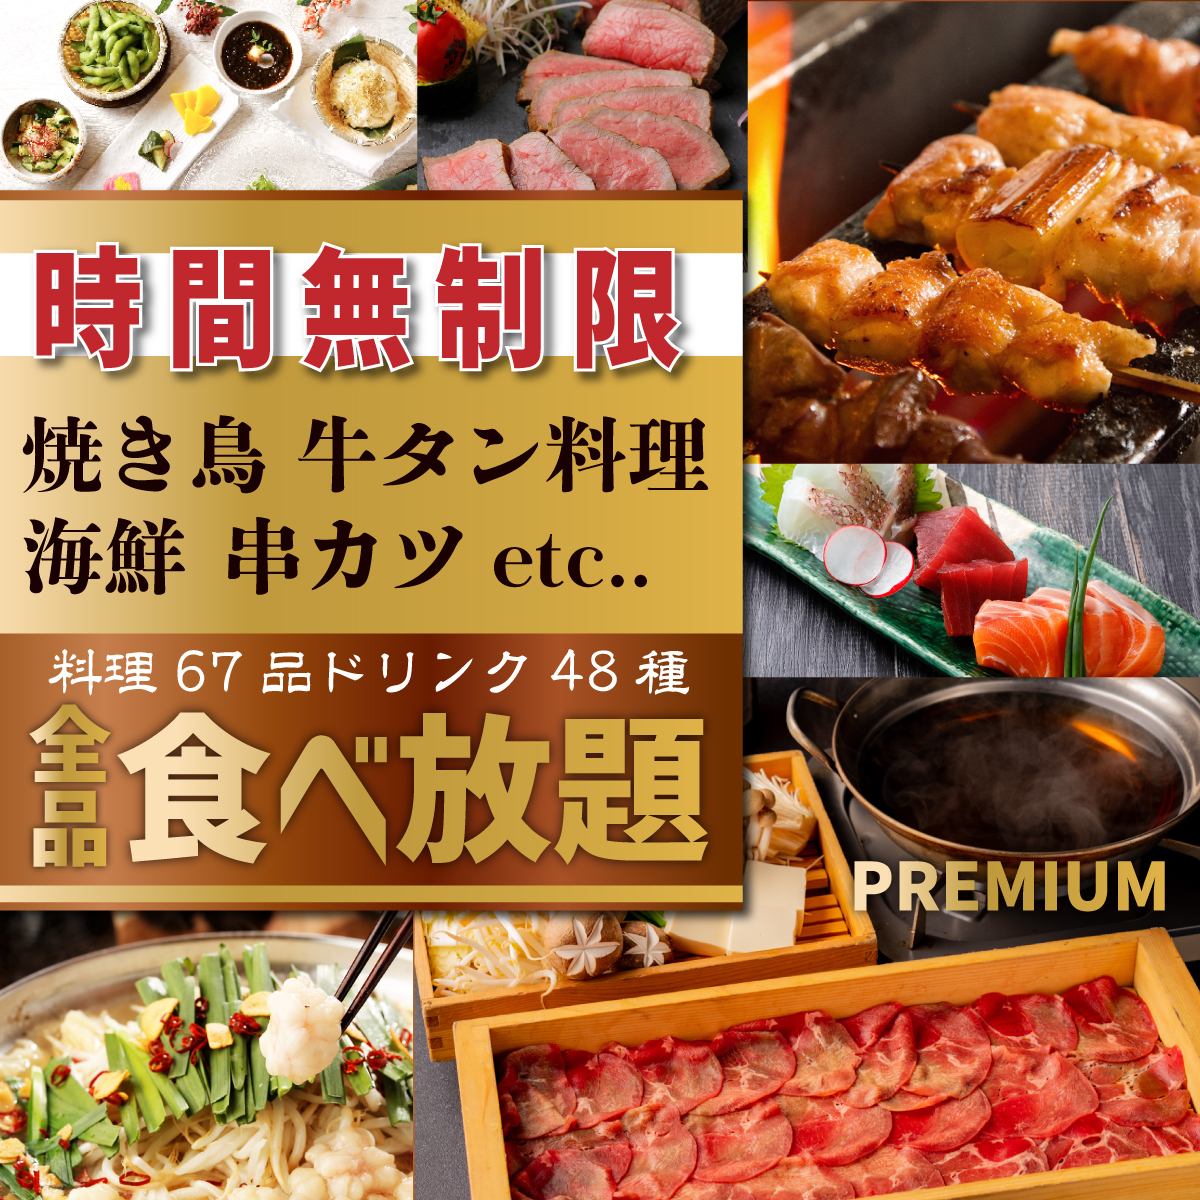 All-you-can-eat and drink of all items including beef tongue, yakitori, and seafood for 4,000 yen with no time limit!